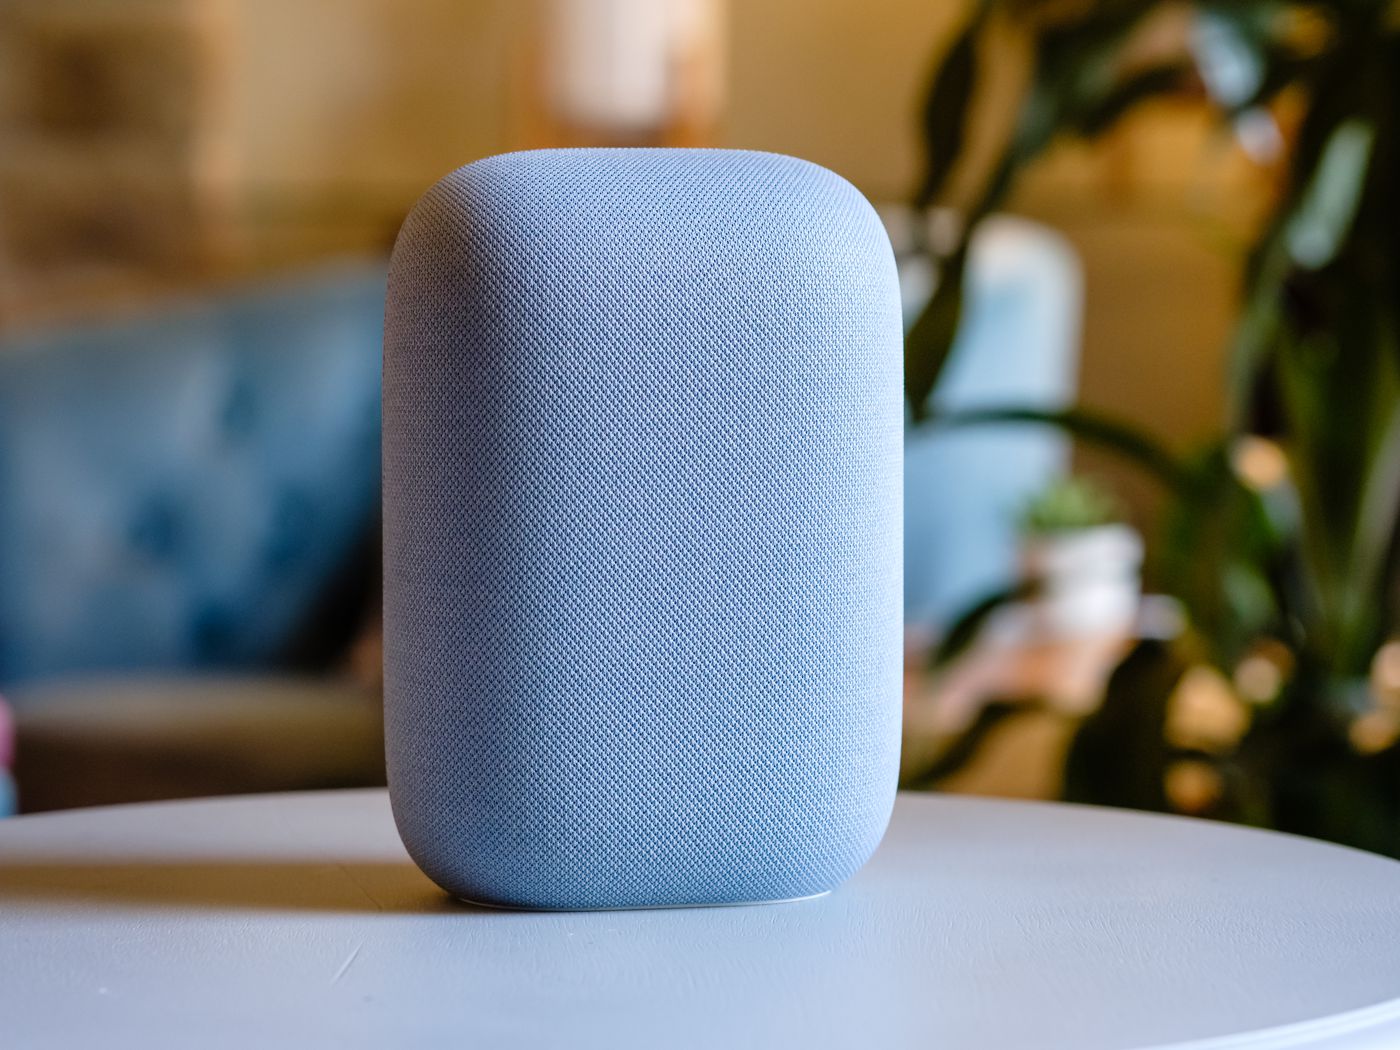 Your Google home speakers are about to get slightly worse because Sonos sued and won The Verge